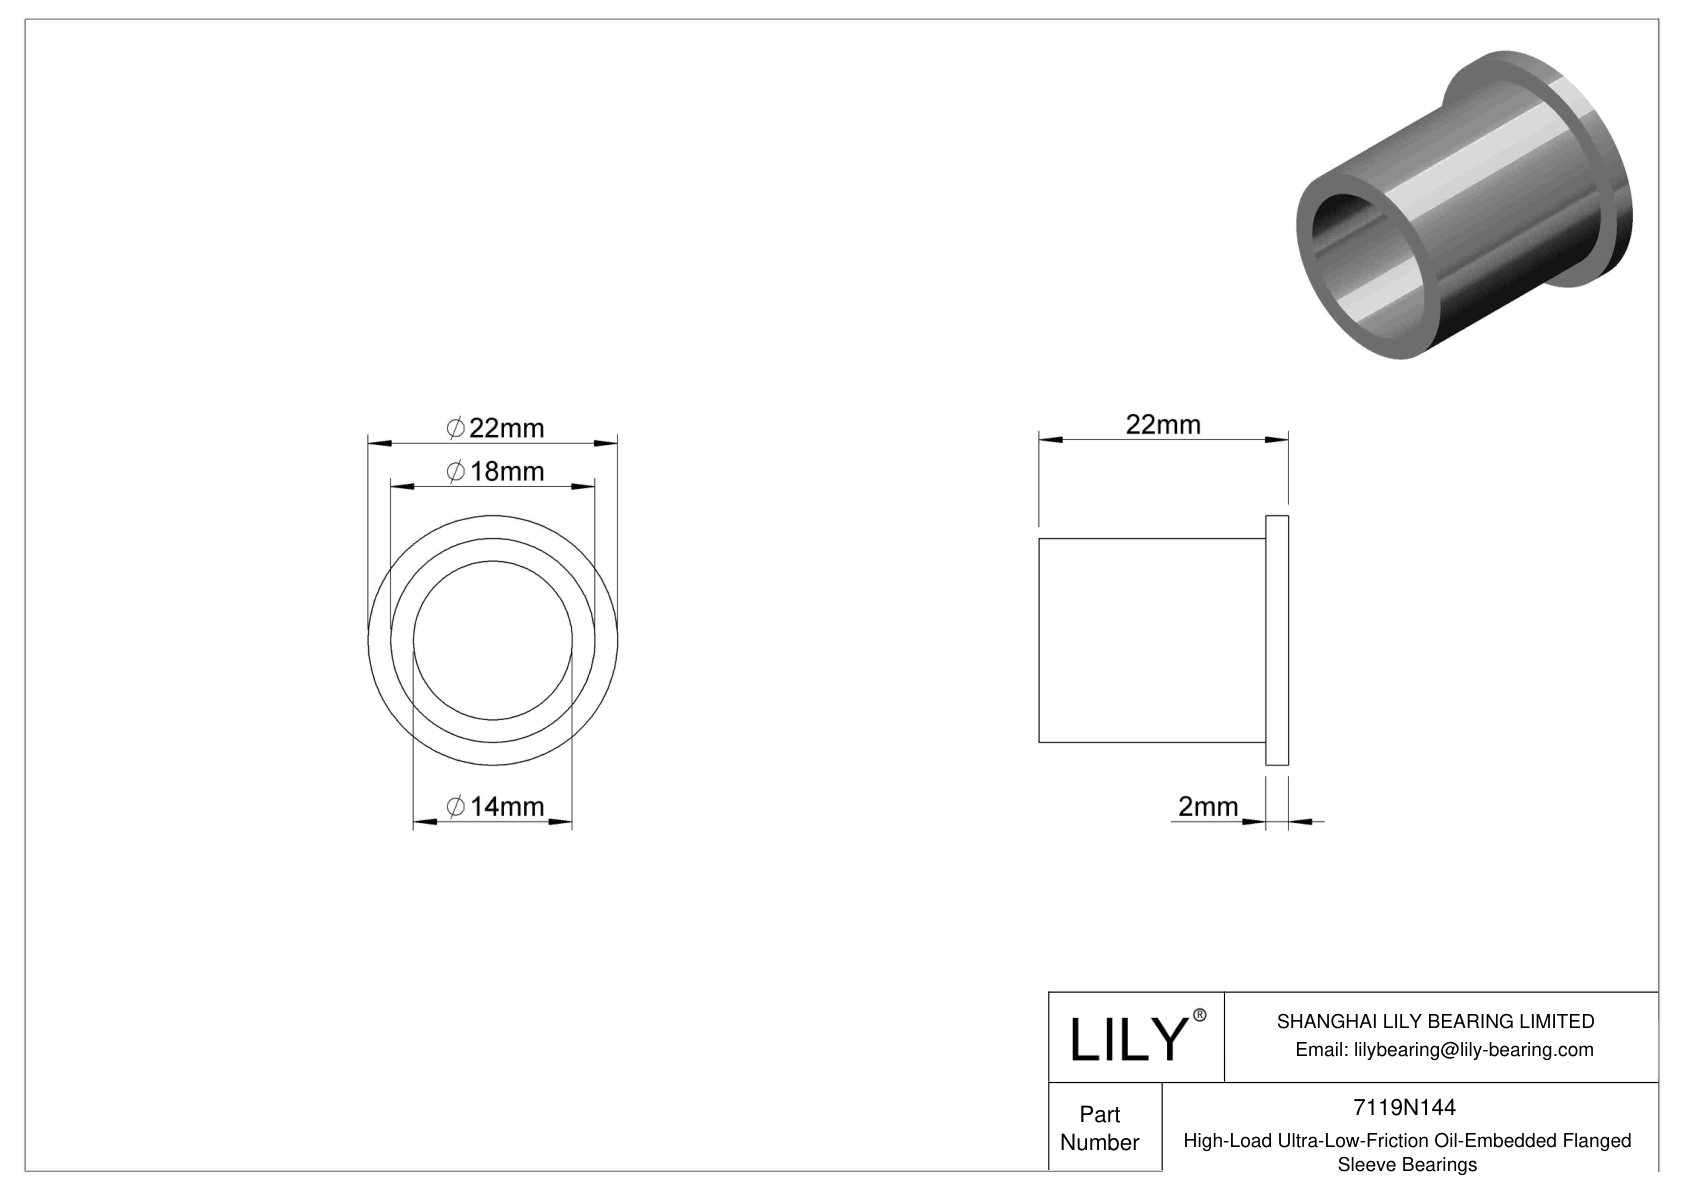 HBBJNBEE High-Load Ultra-Low-Friction Oil-Embedded Flanged Sleeve Bearings cad drawing